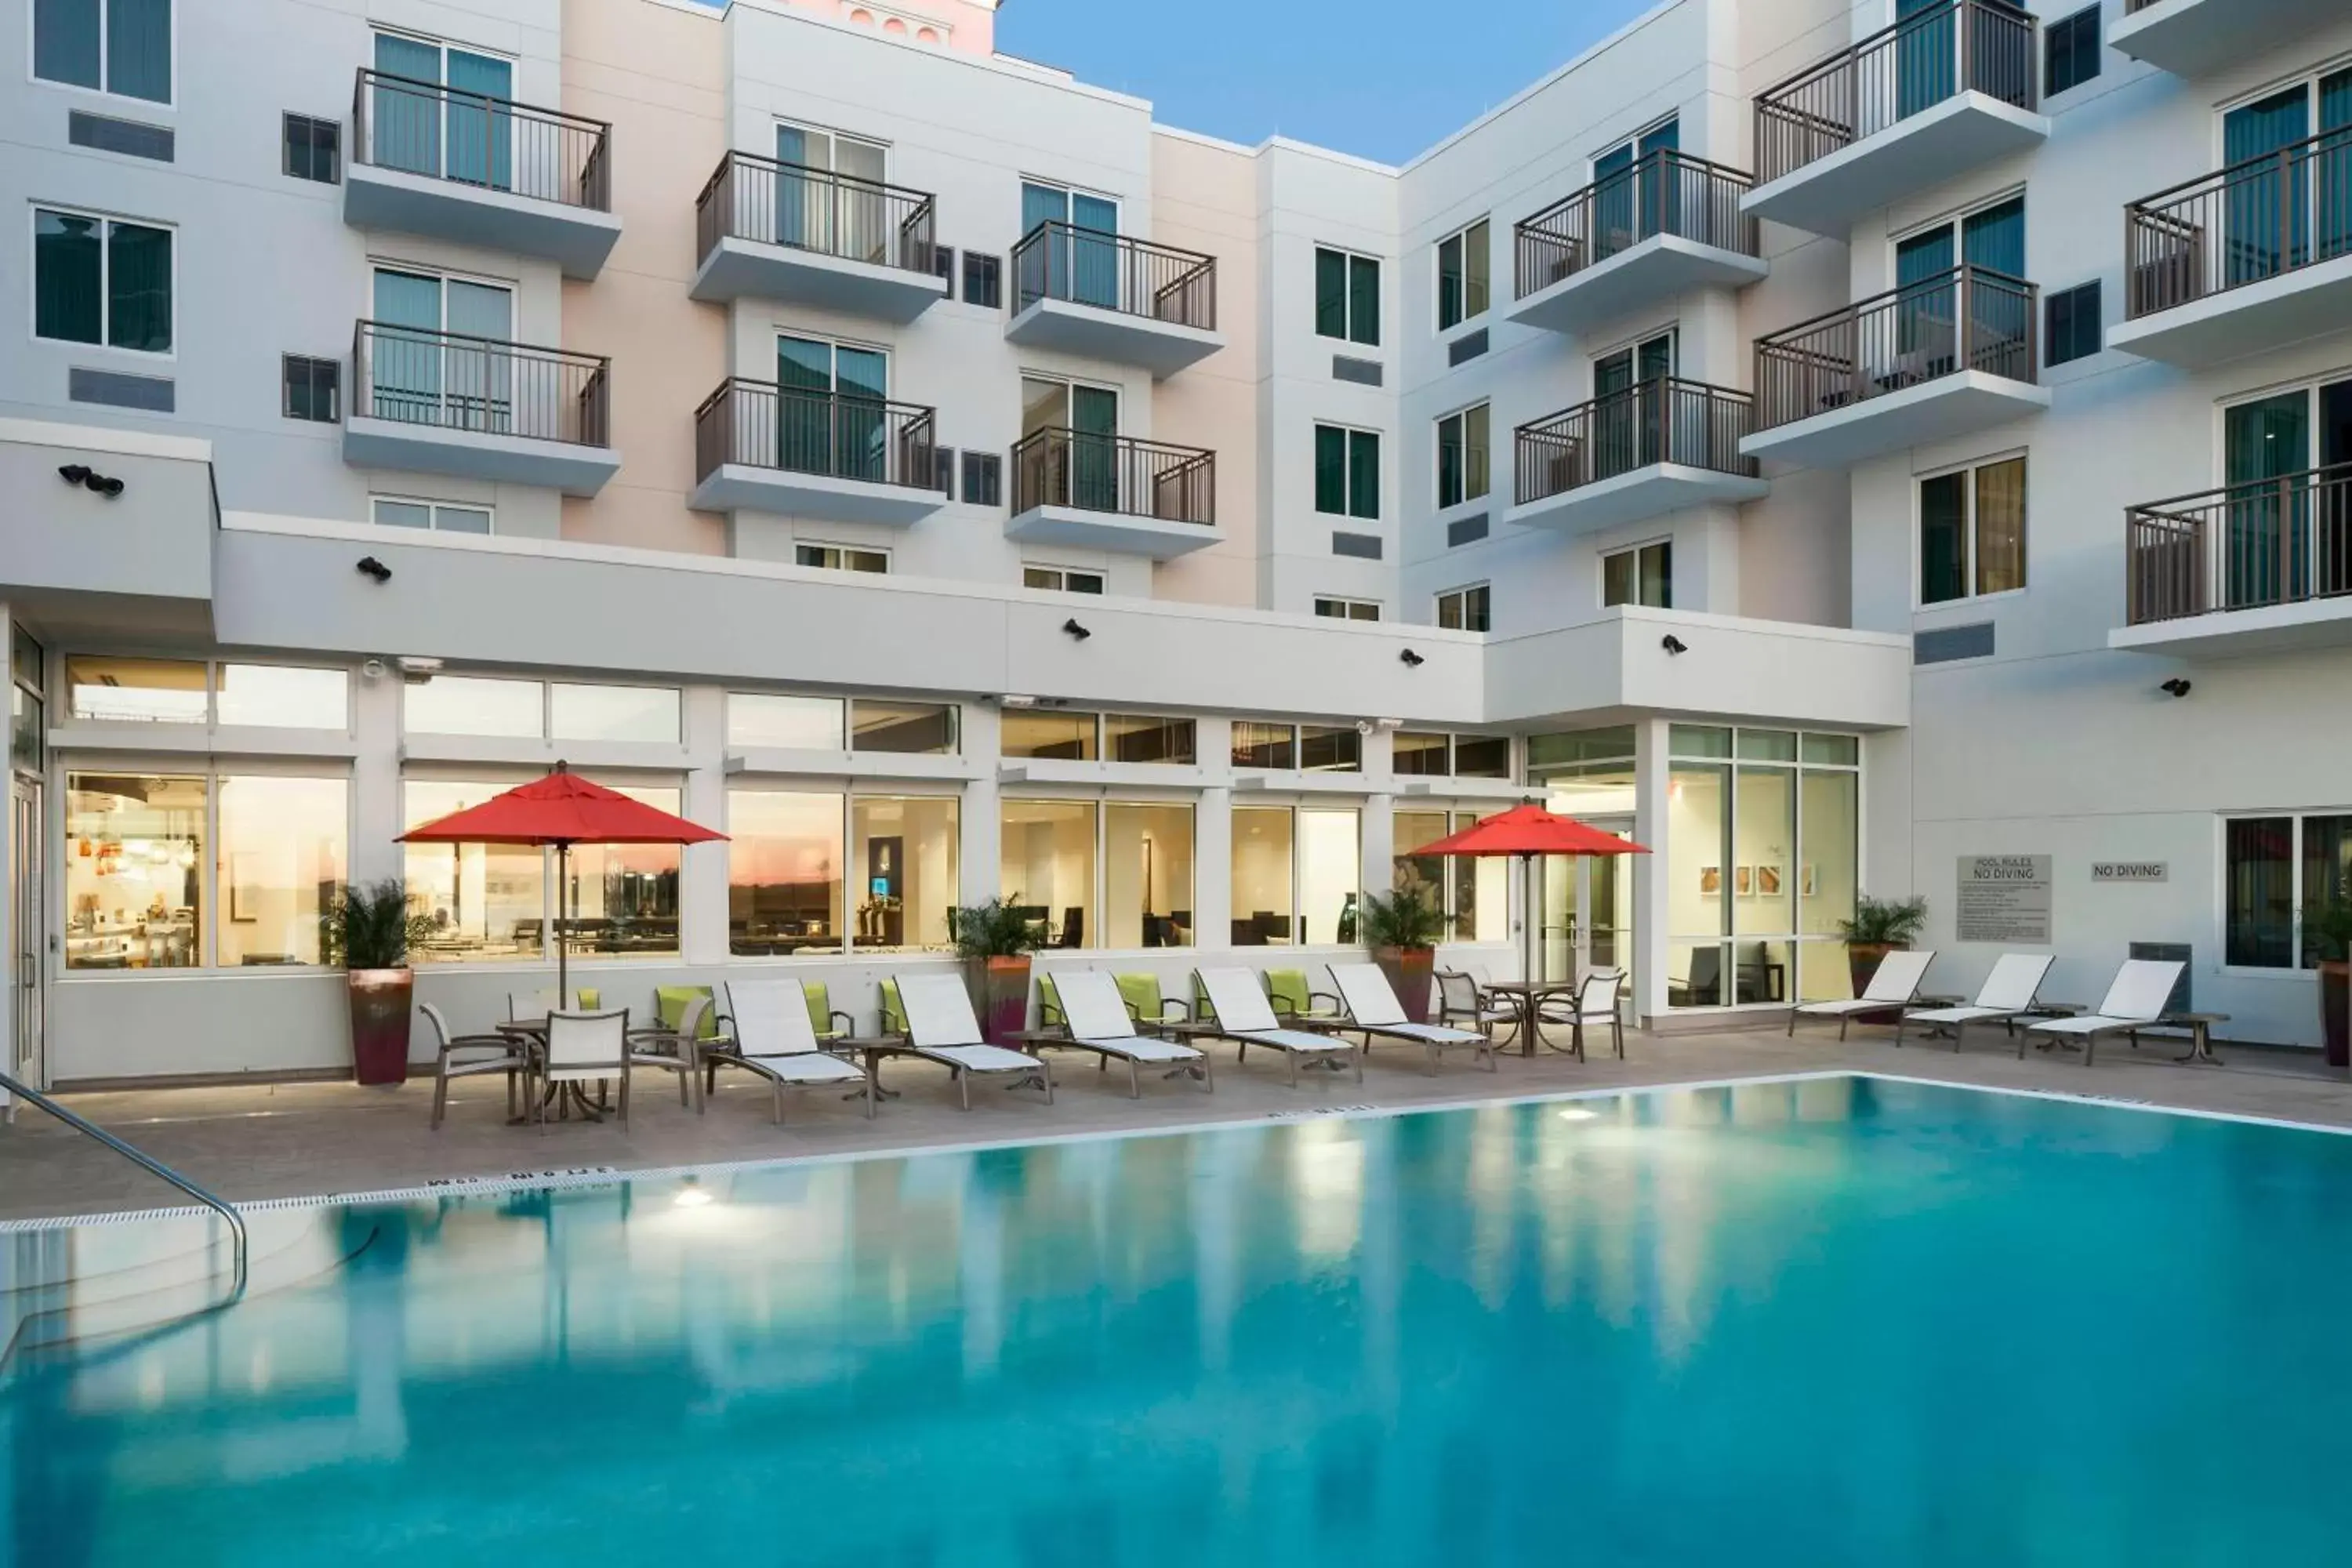 Swimming Pool in SpringHill Suites by Marriott Clearwater Beach